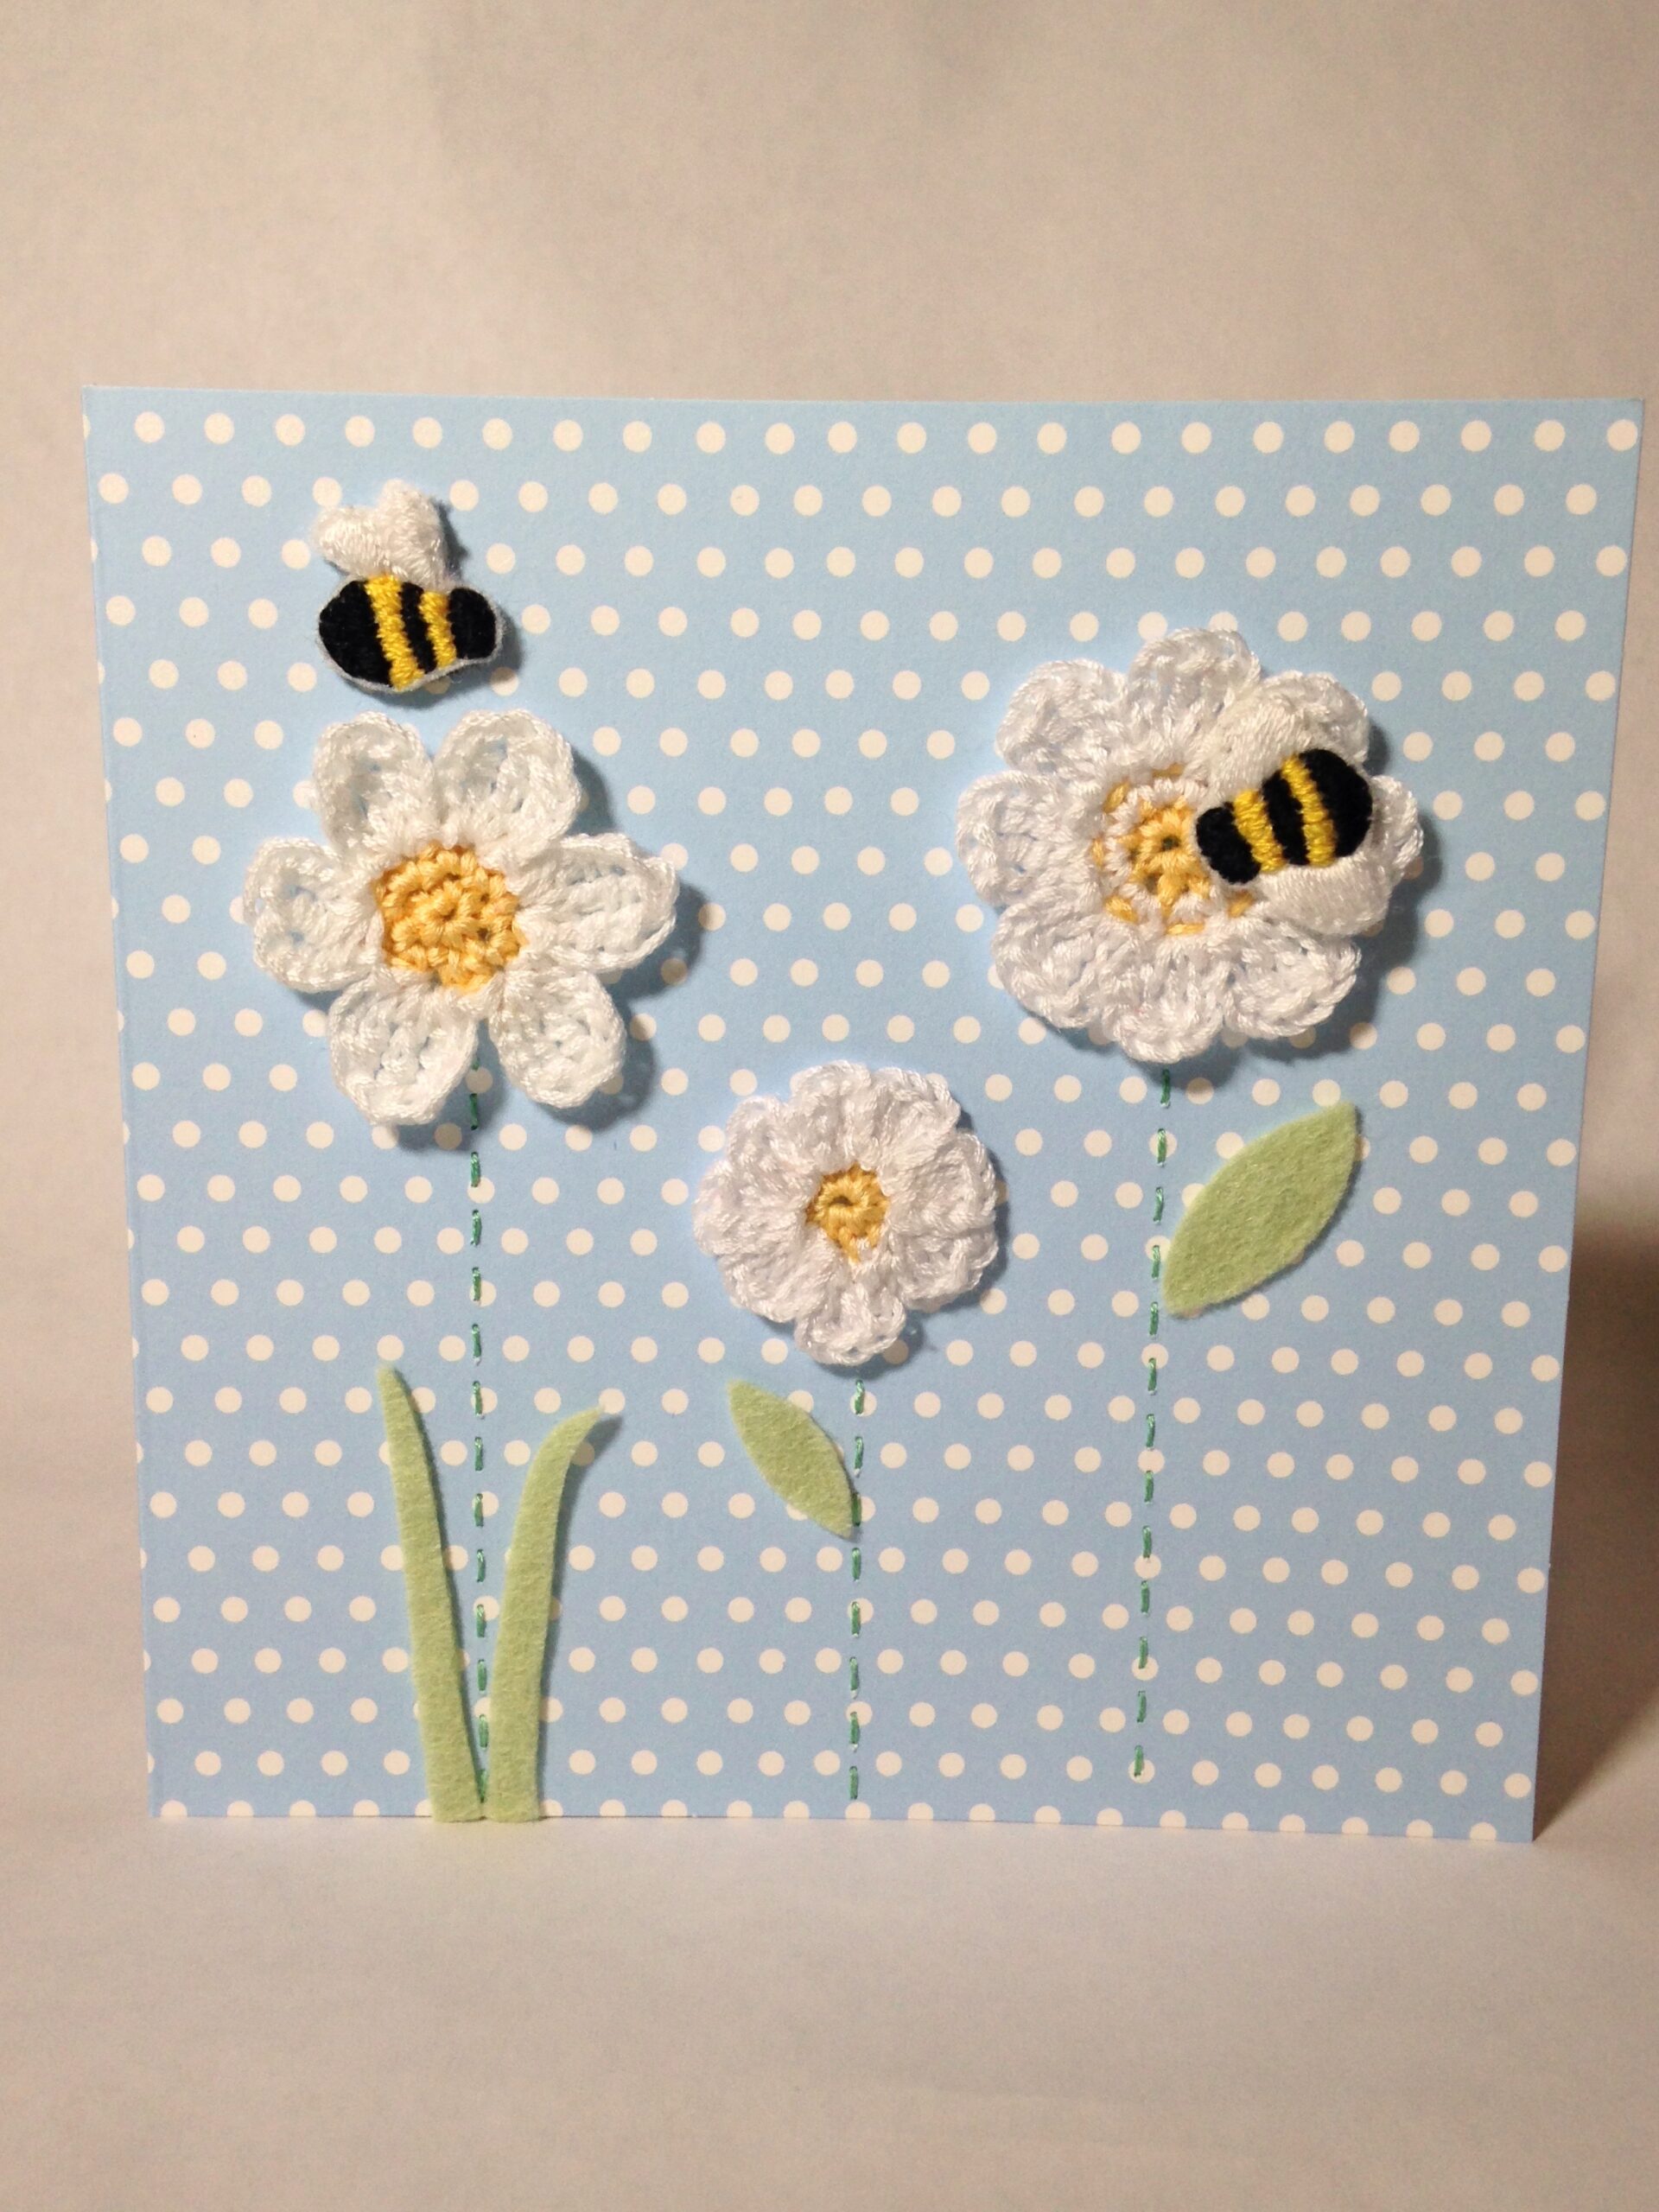 Bumblebee and flowers greetings card.